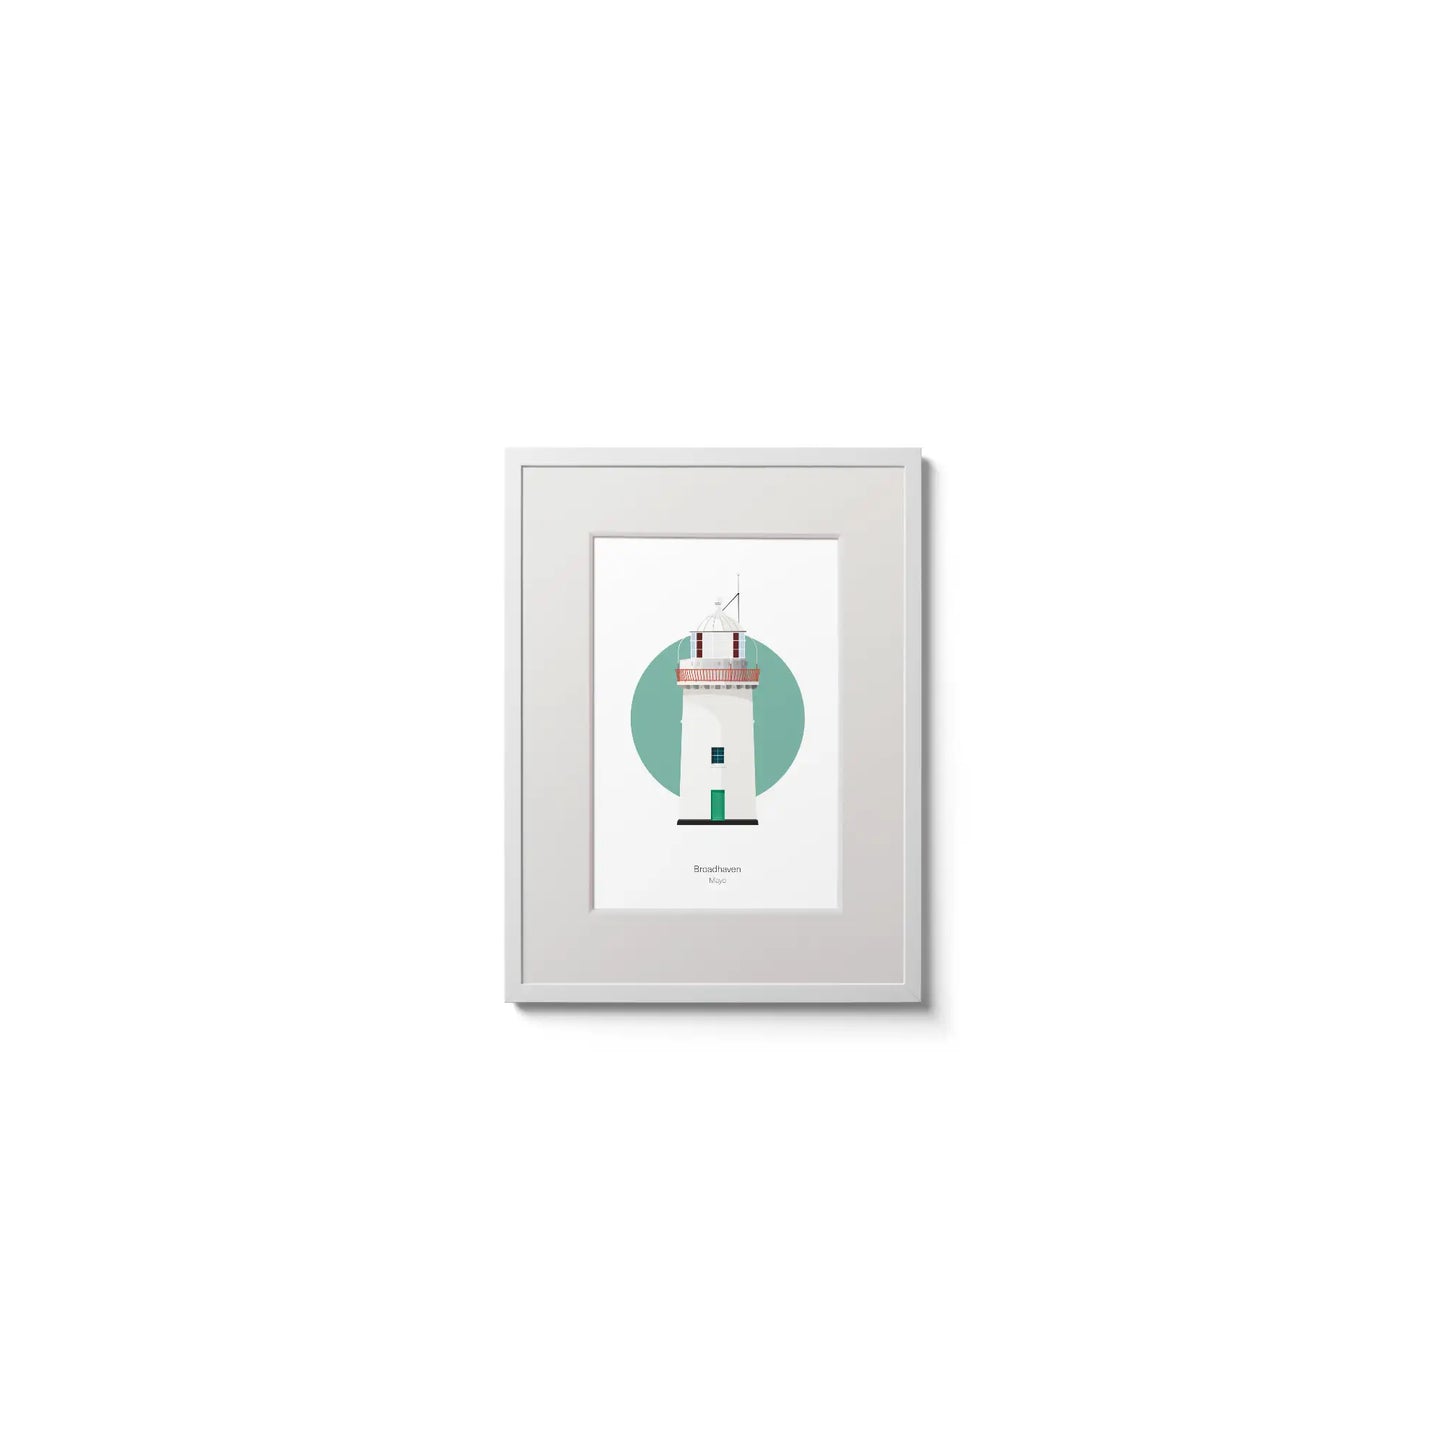 Illustration of Broadhaven lighthouse on a white background inside light blue square,  in a white frame measuring 15x20cm.